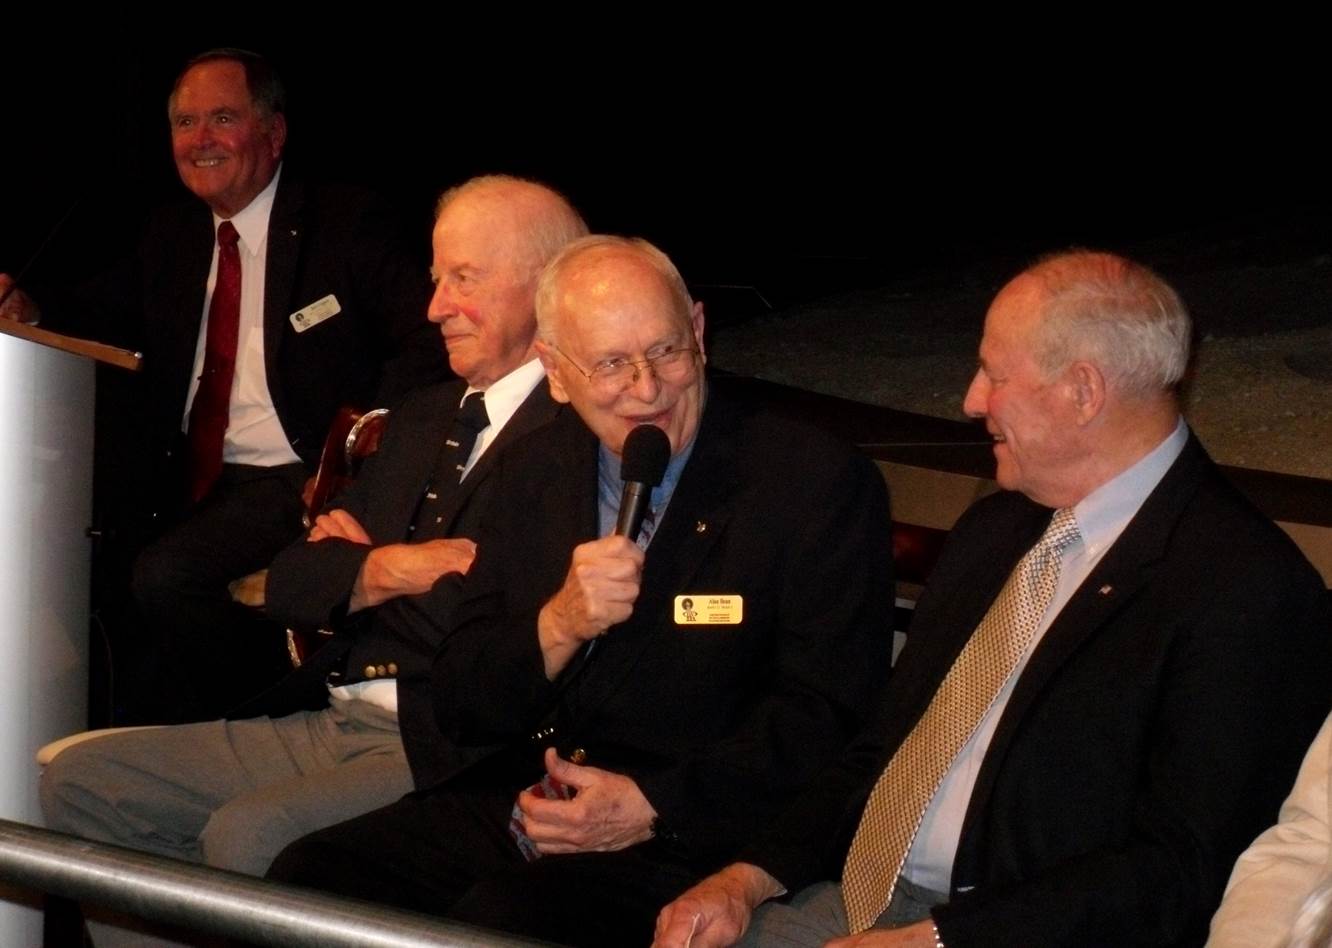 Skylab at 40 event Kennedy Space Center Visitor Complex Alan Bean Bob Crippen Jack Lousma photo credit Emily Carney AmericaSpace